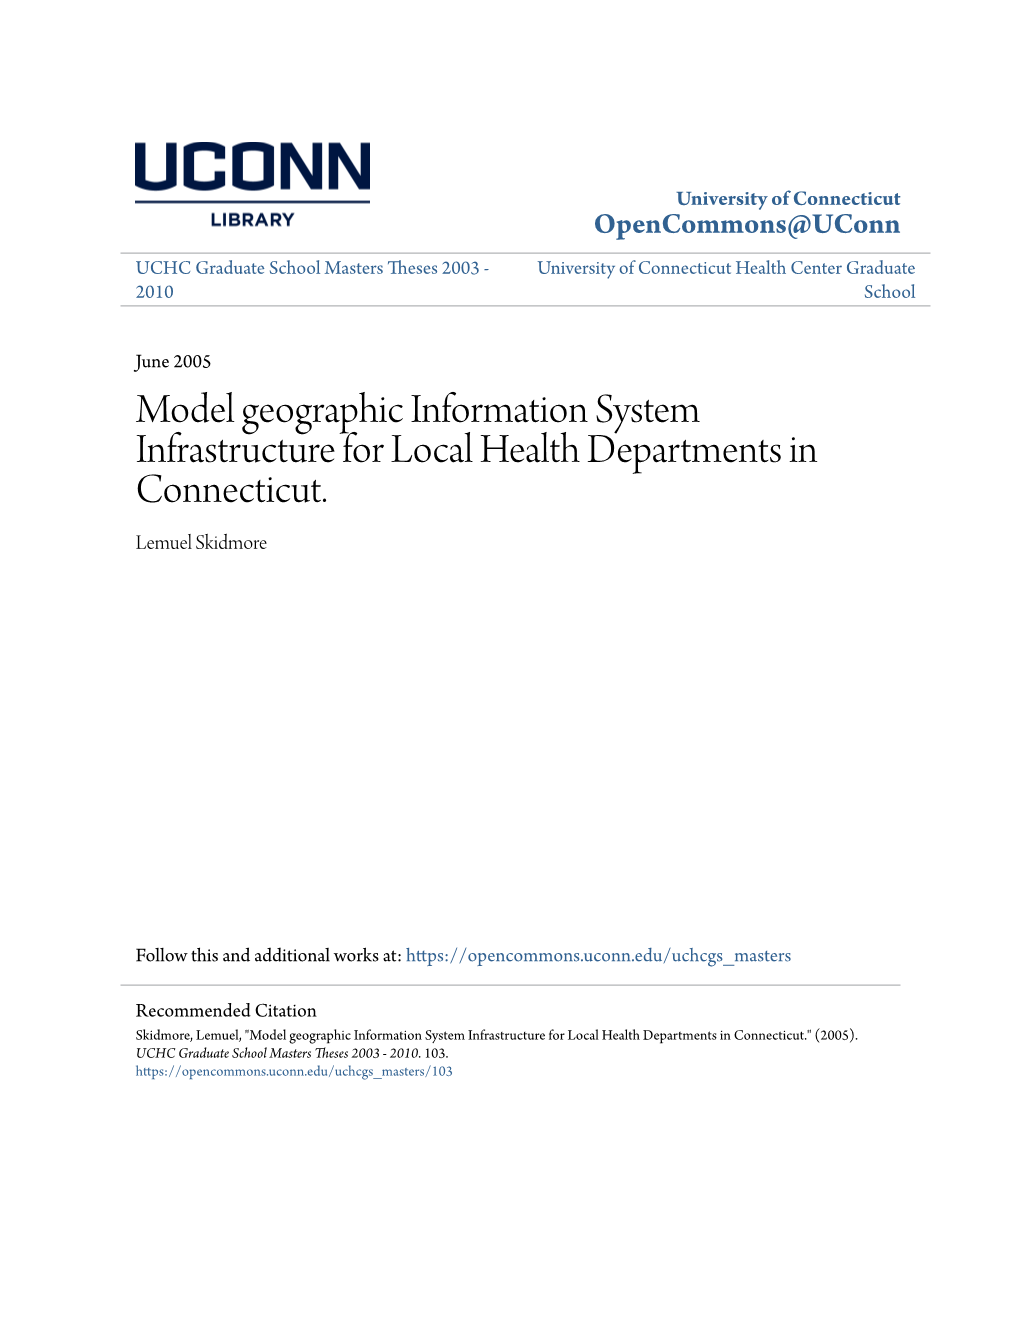 Model Geographic Information System Infrastructure for Local Health Departments in Connecticut